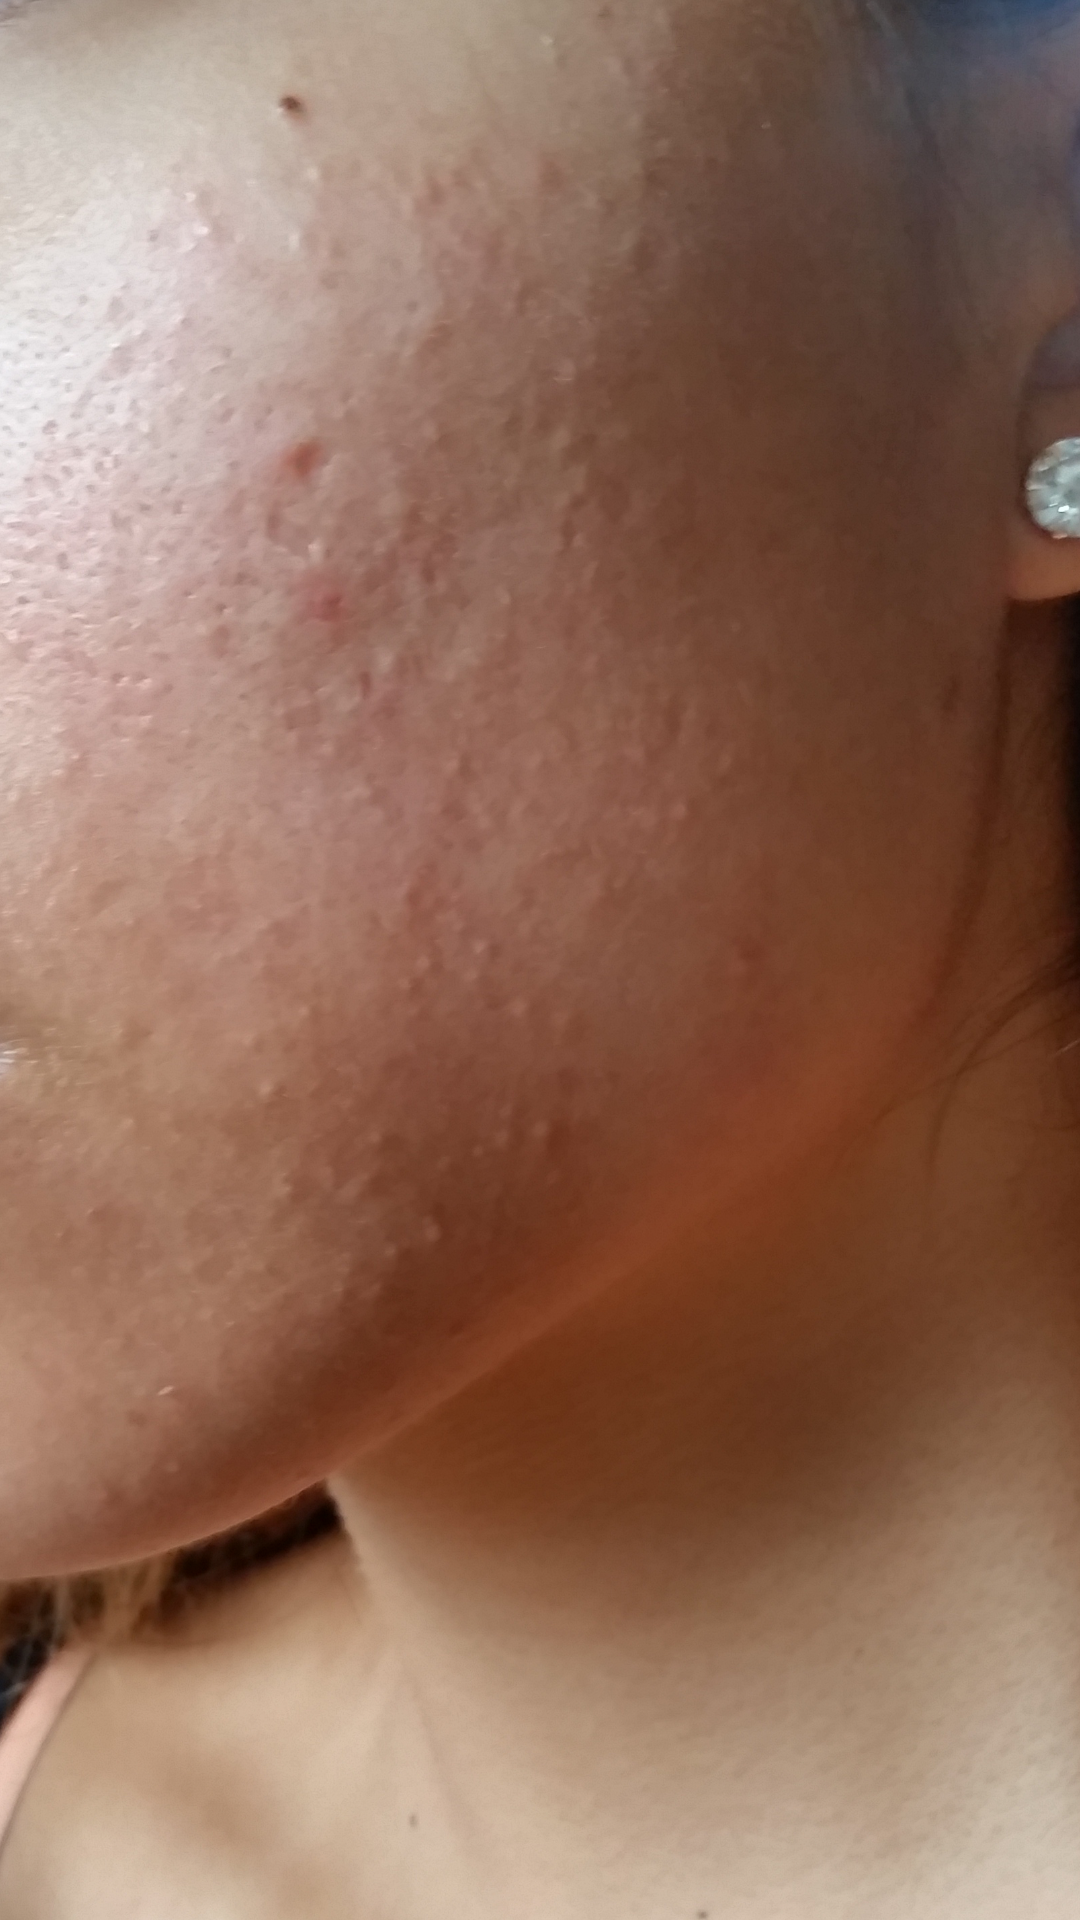 Small bumps on face.